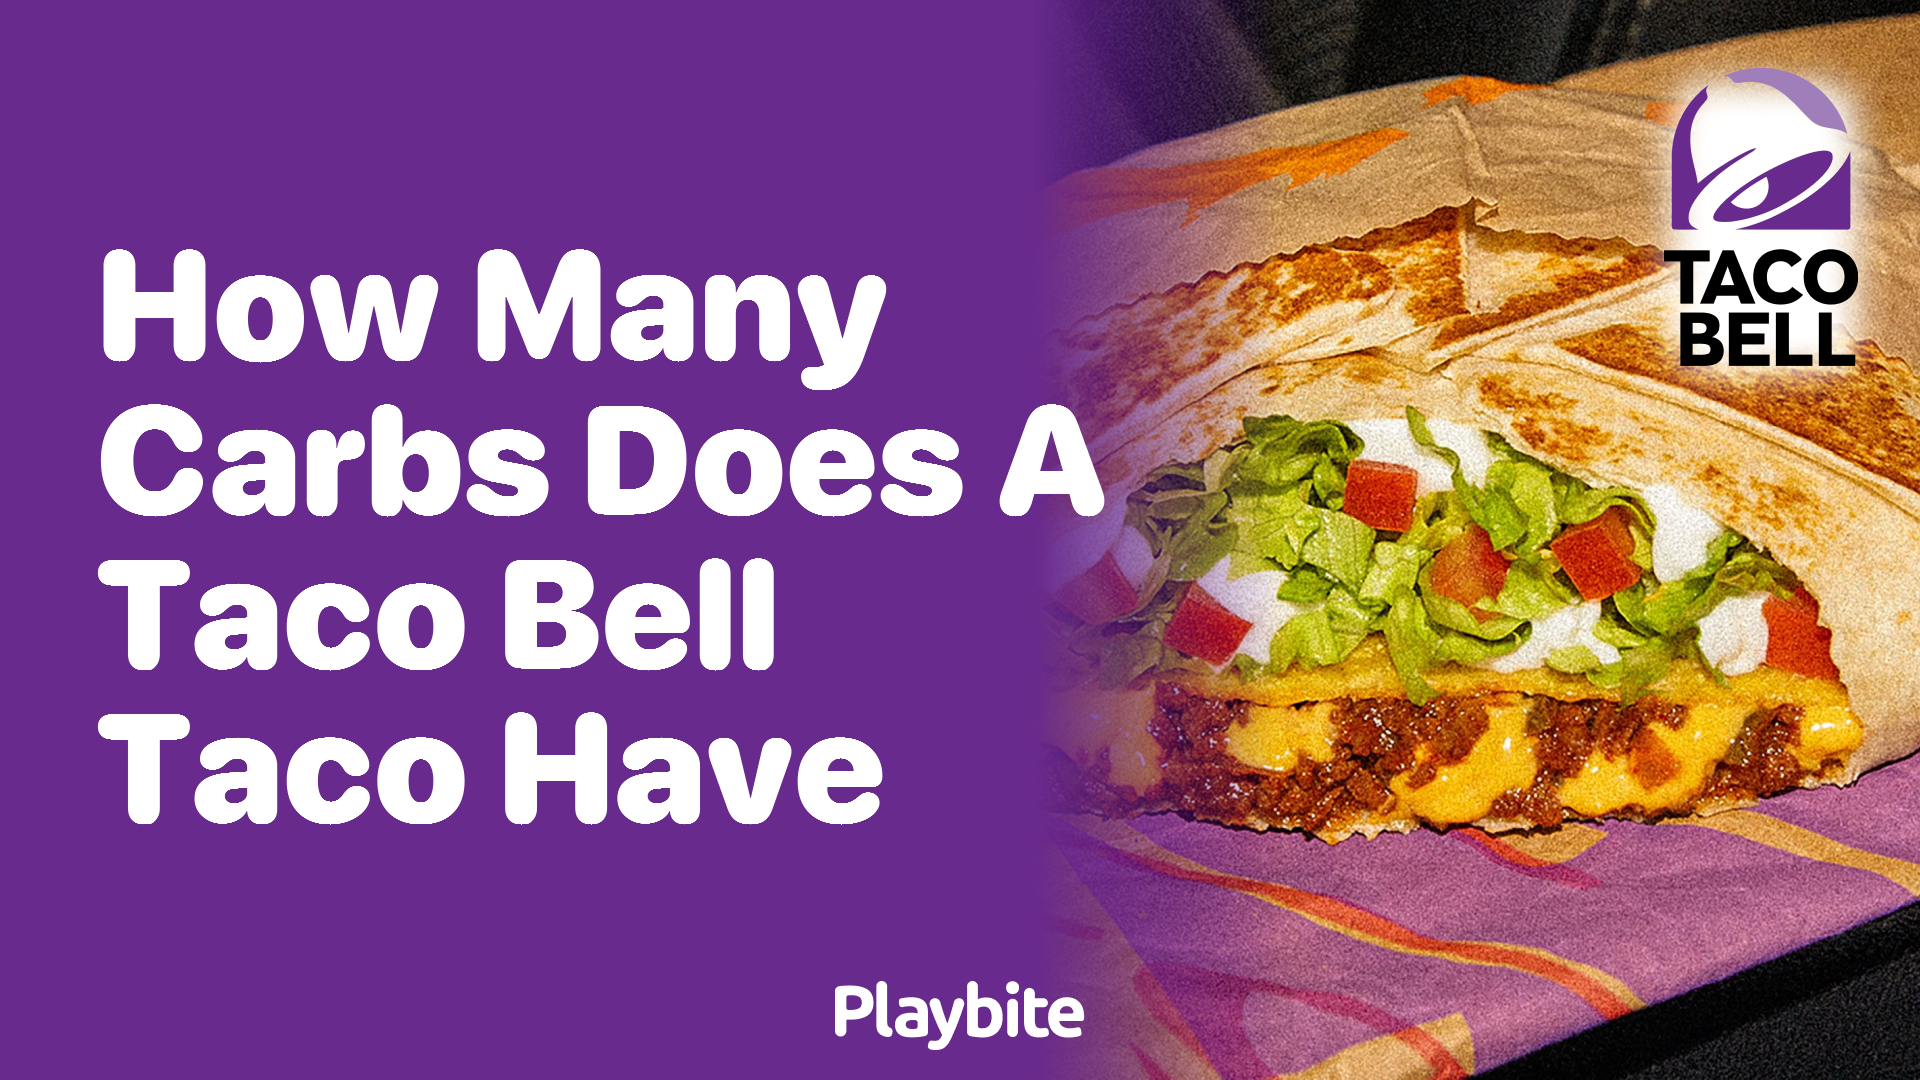 How Many Carbs Does a Taco Bell Taco Have?